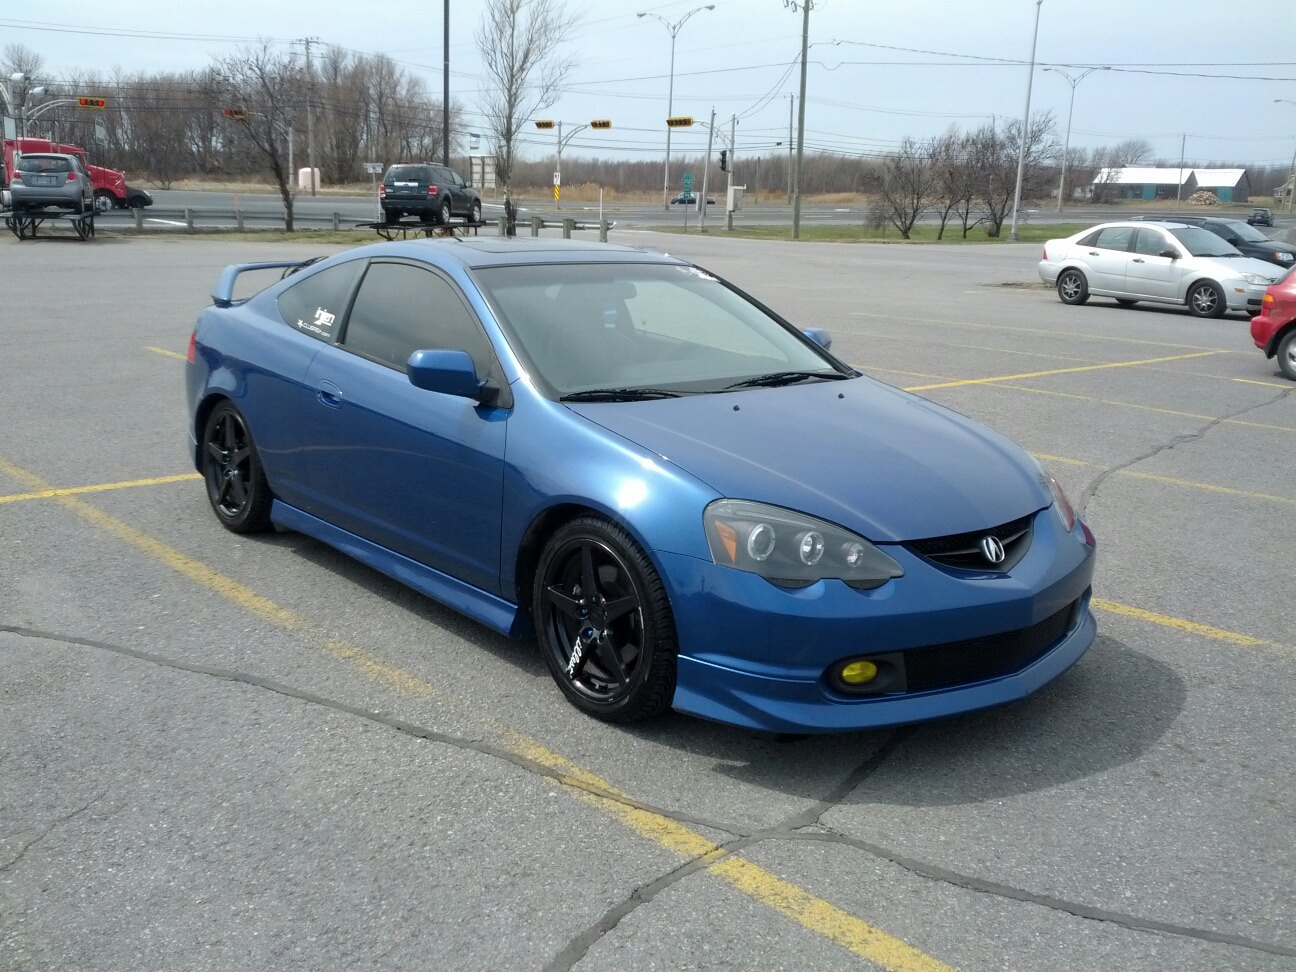 Clean Type S from Qc/Montreal